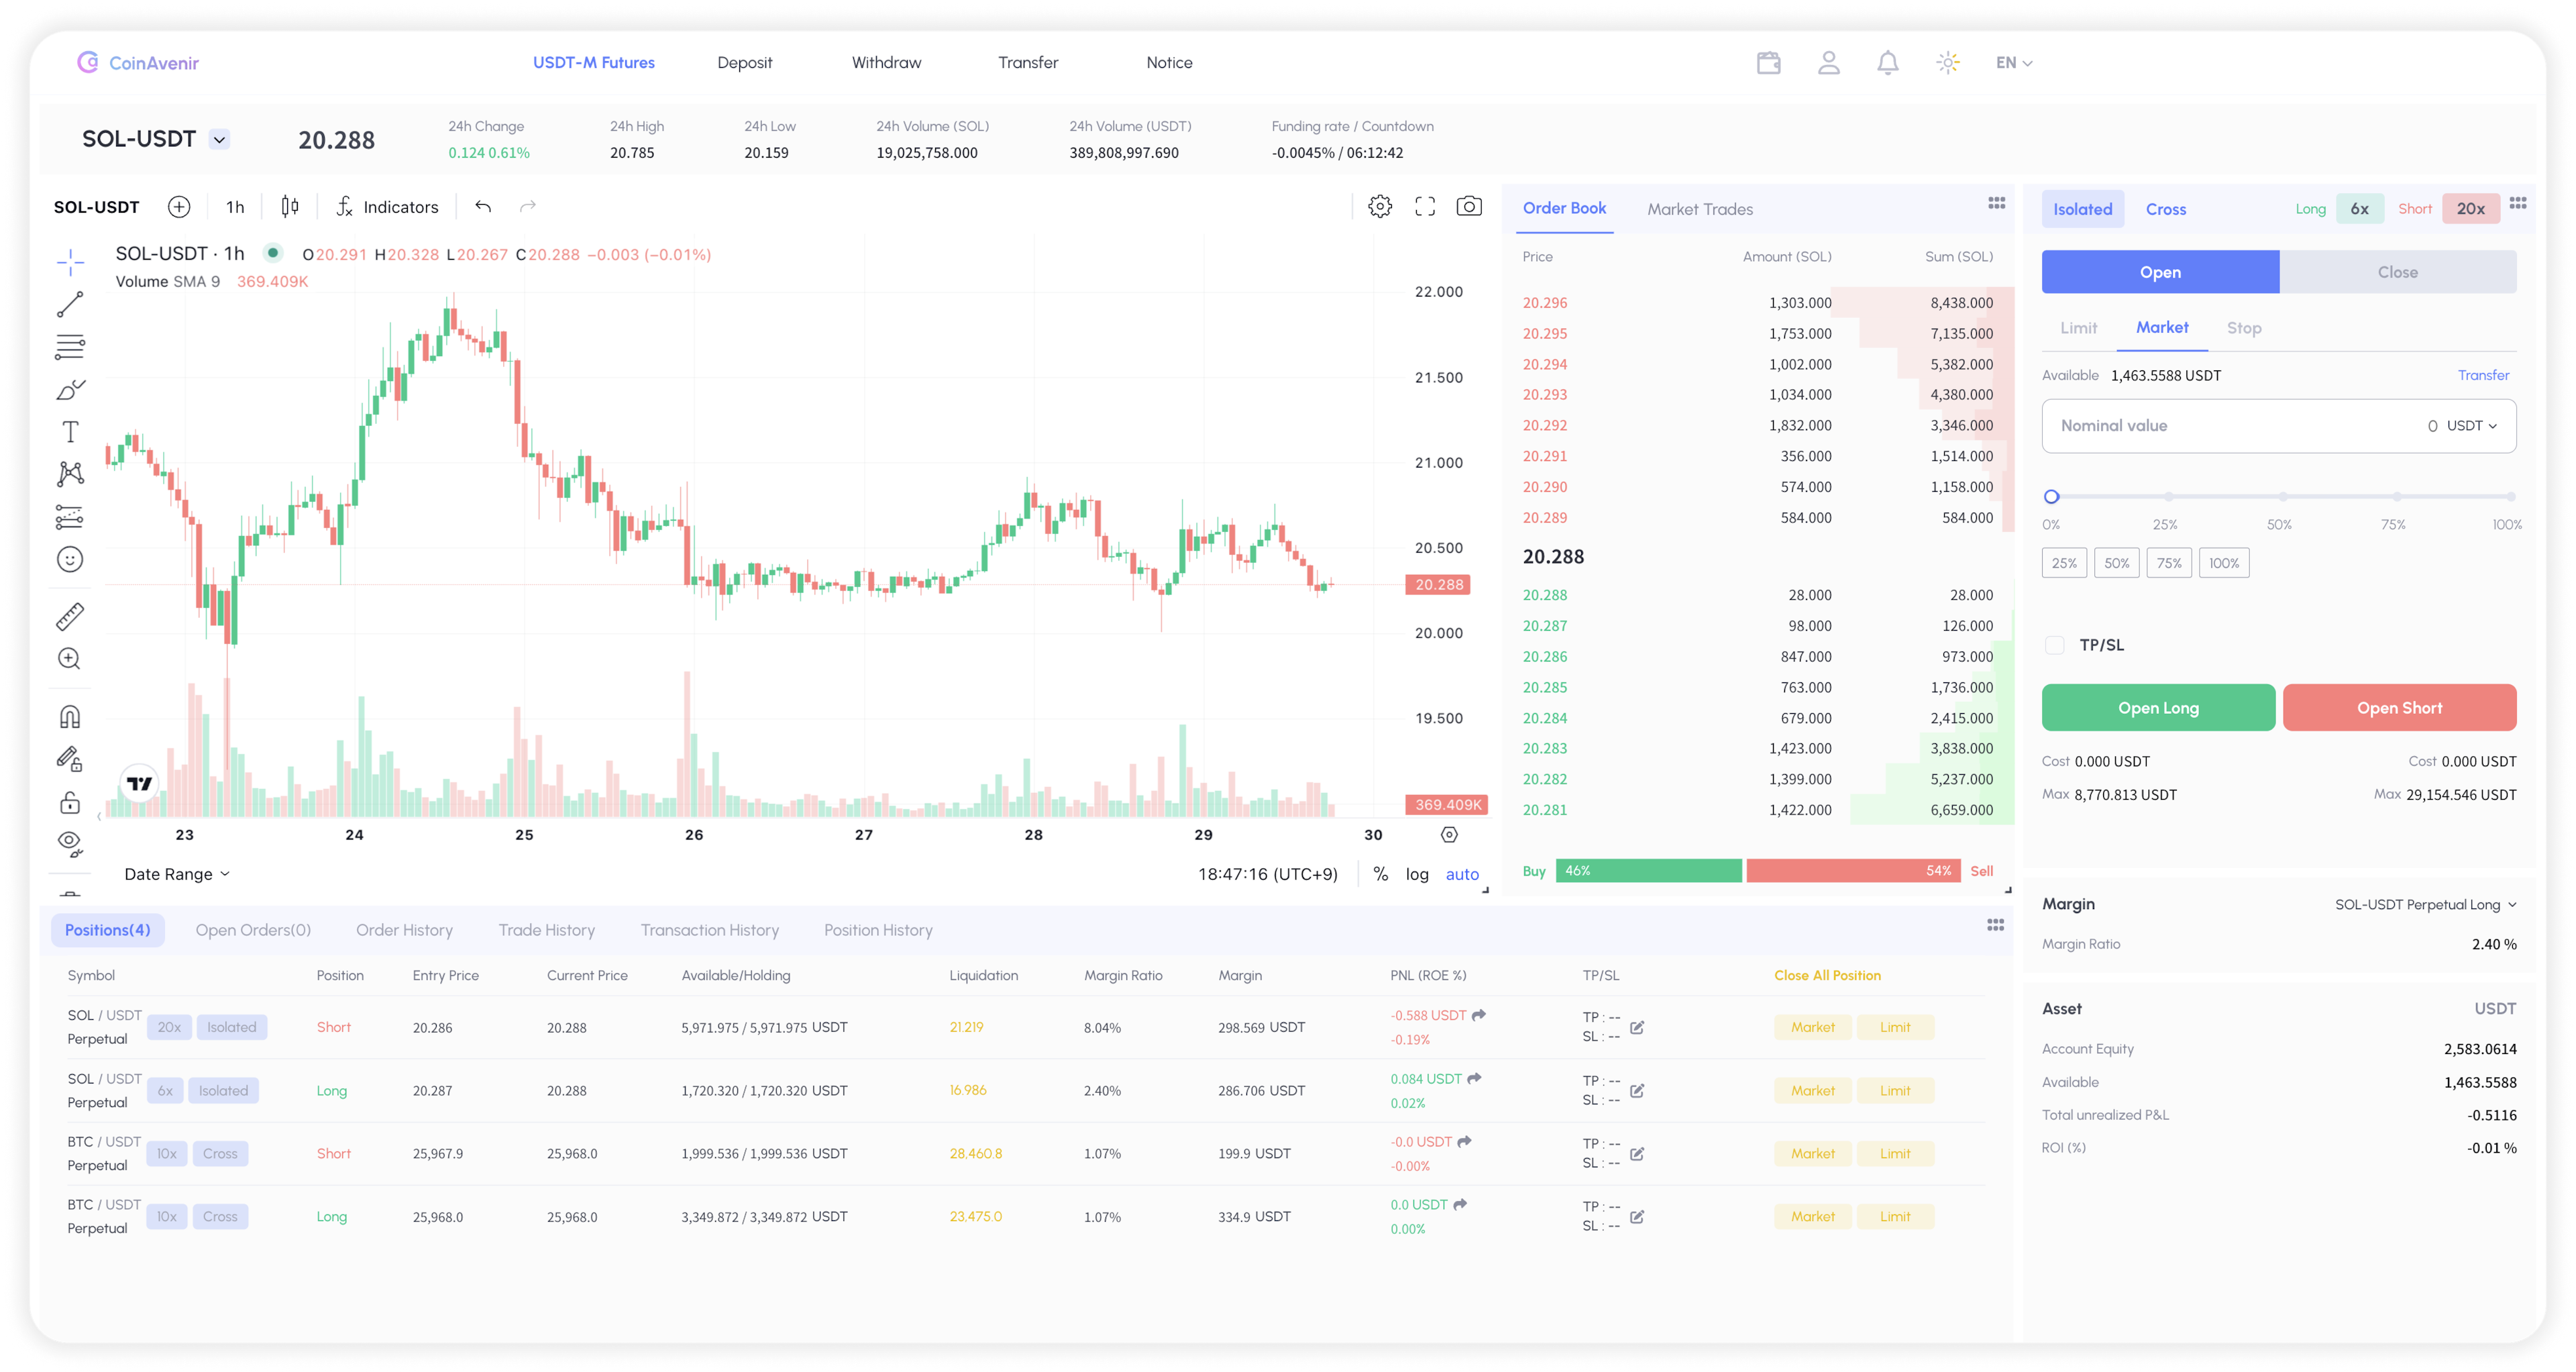 trading view image